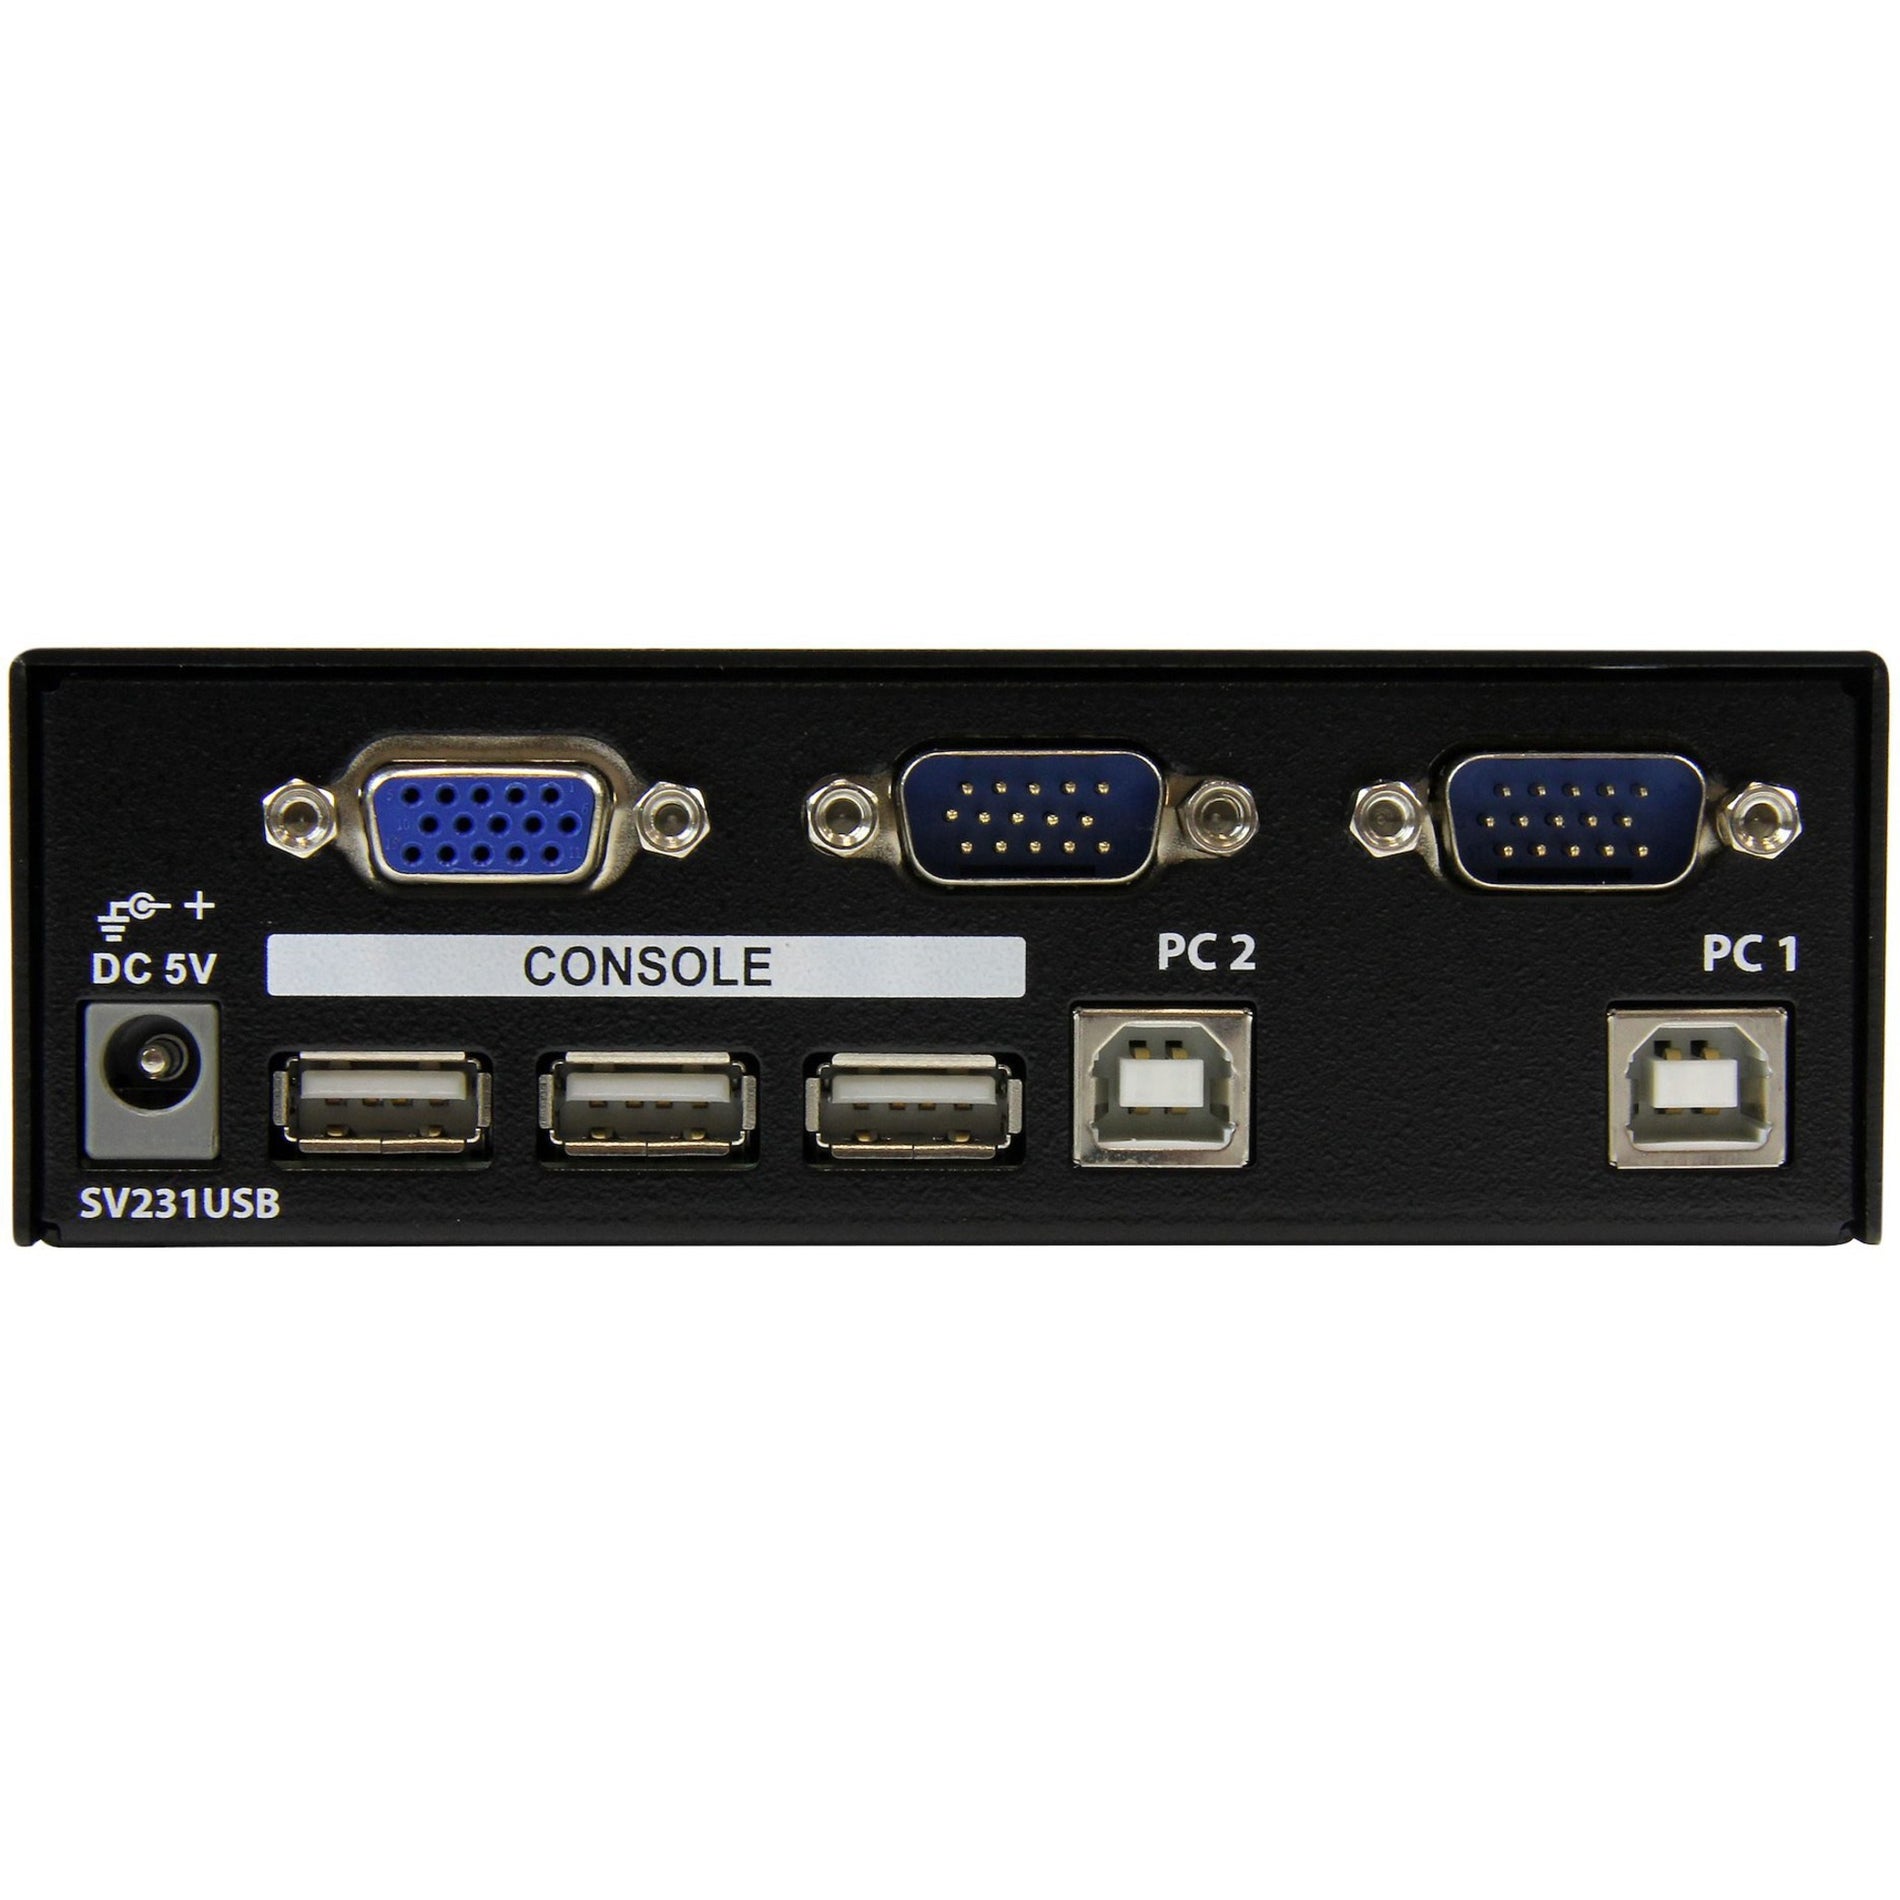 StarTech.com SV231USB 2 Port StarView USB KVM Switch Kit with Cables, Easy Computer Control